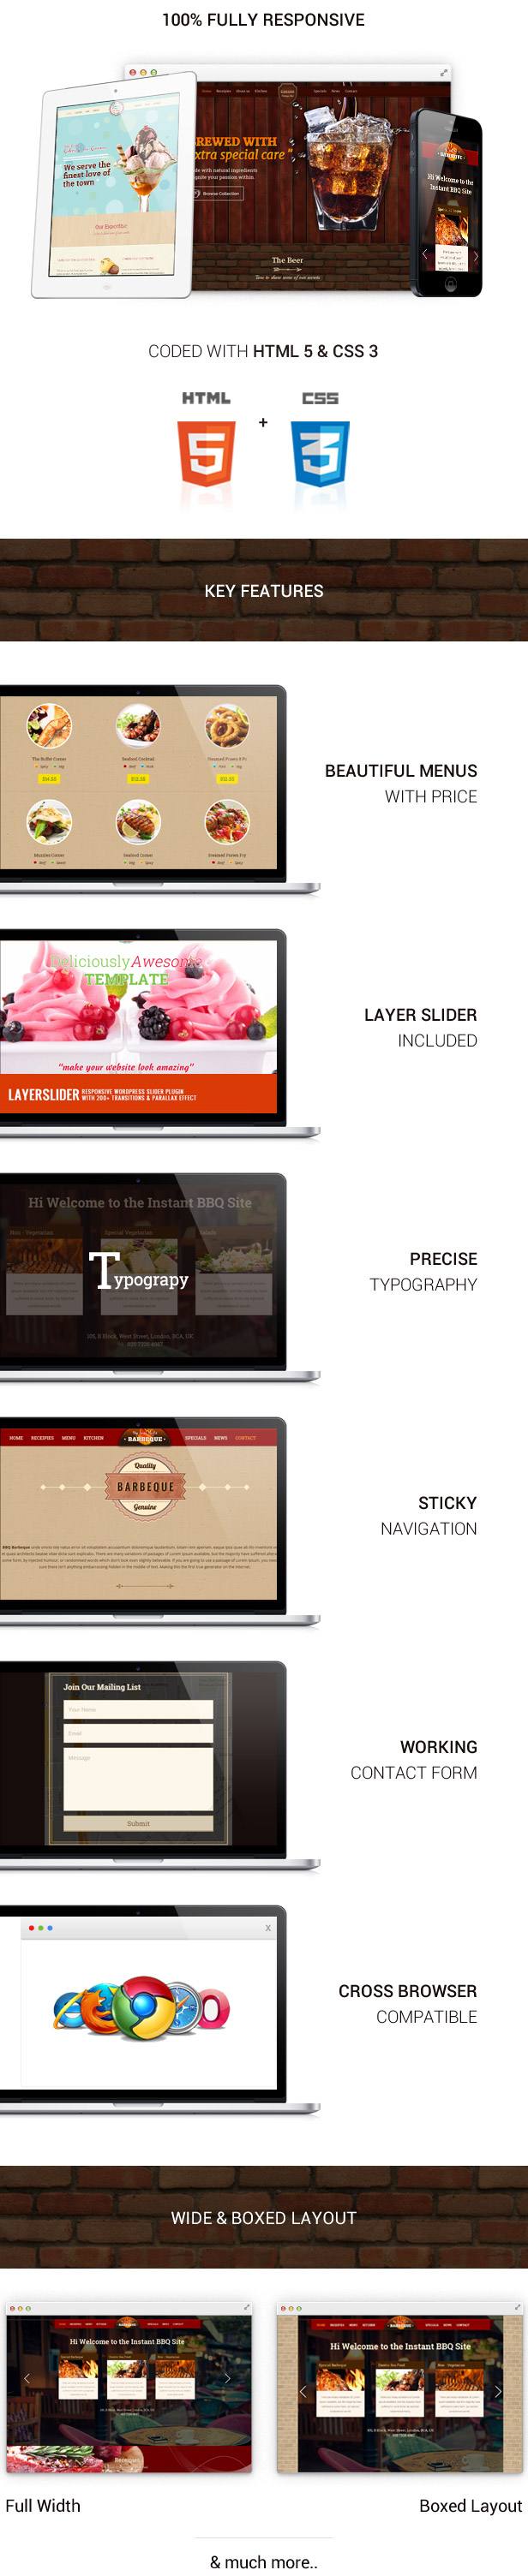 Food & Beverages One Page HTML5 Template - 10